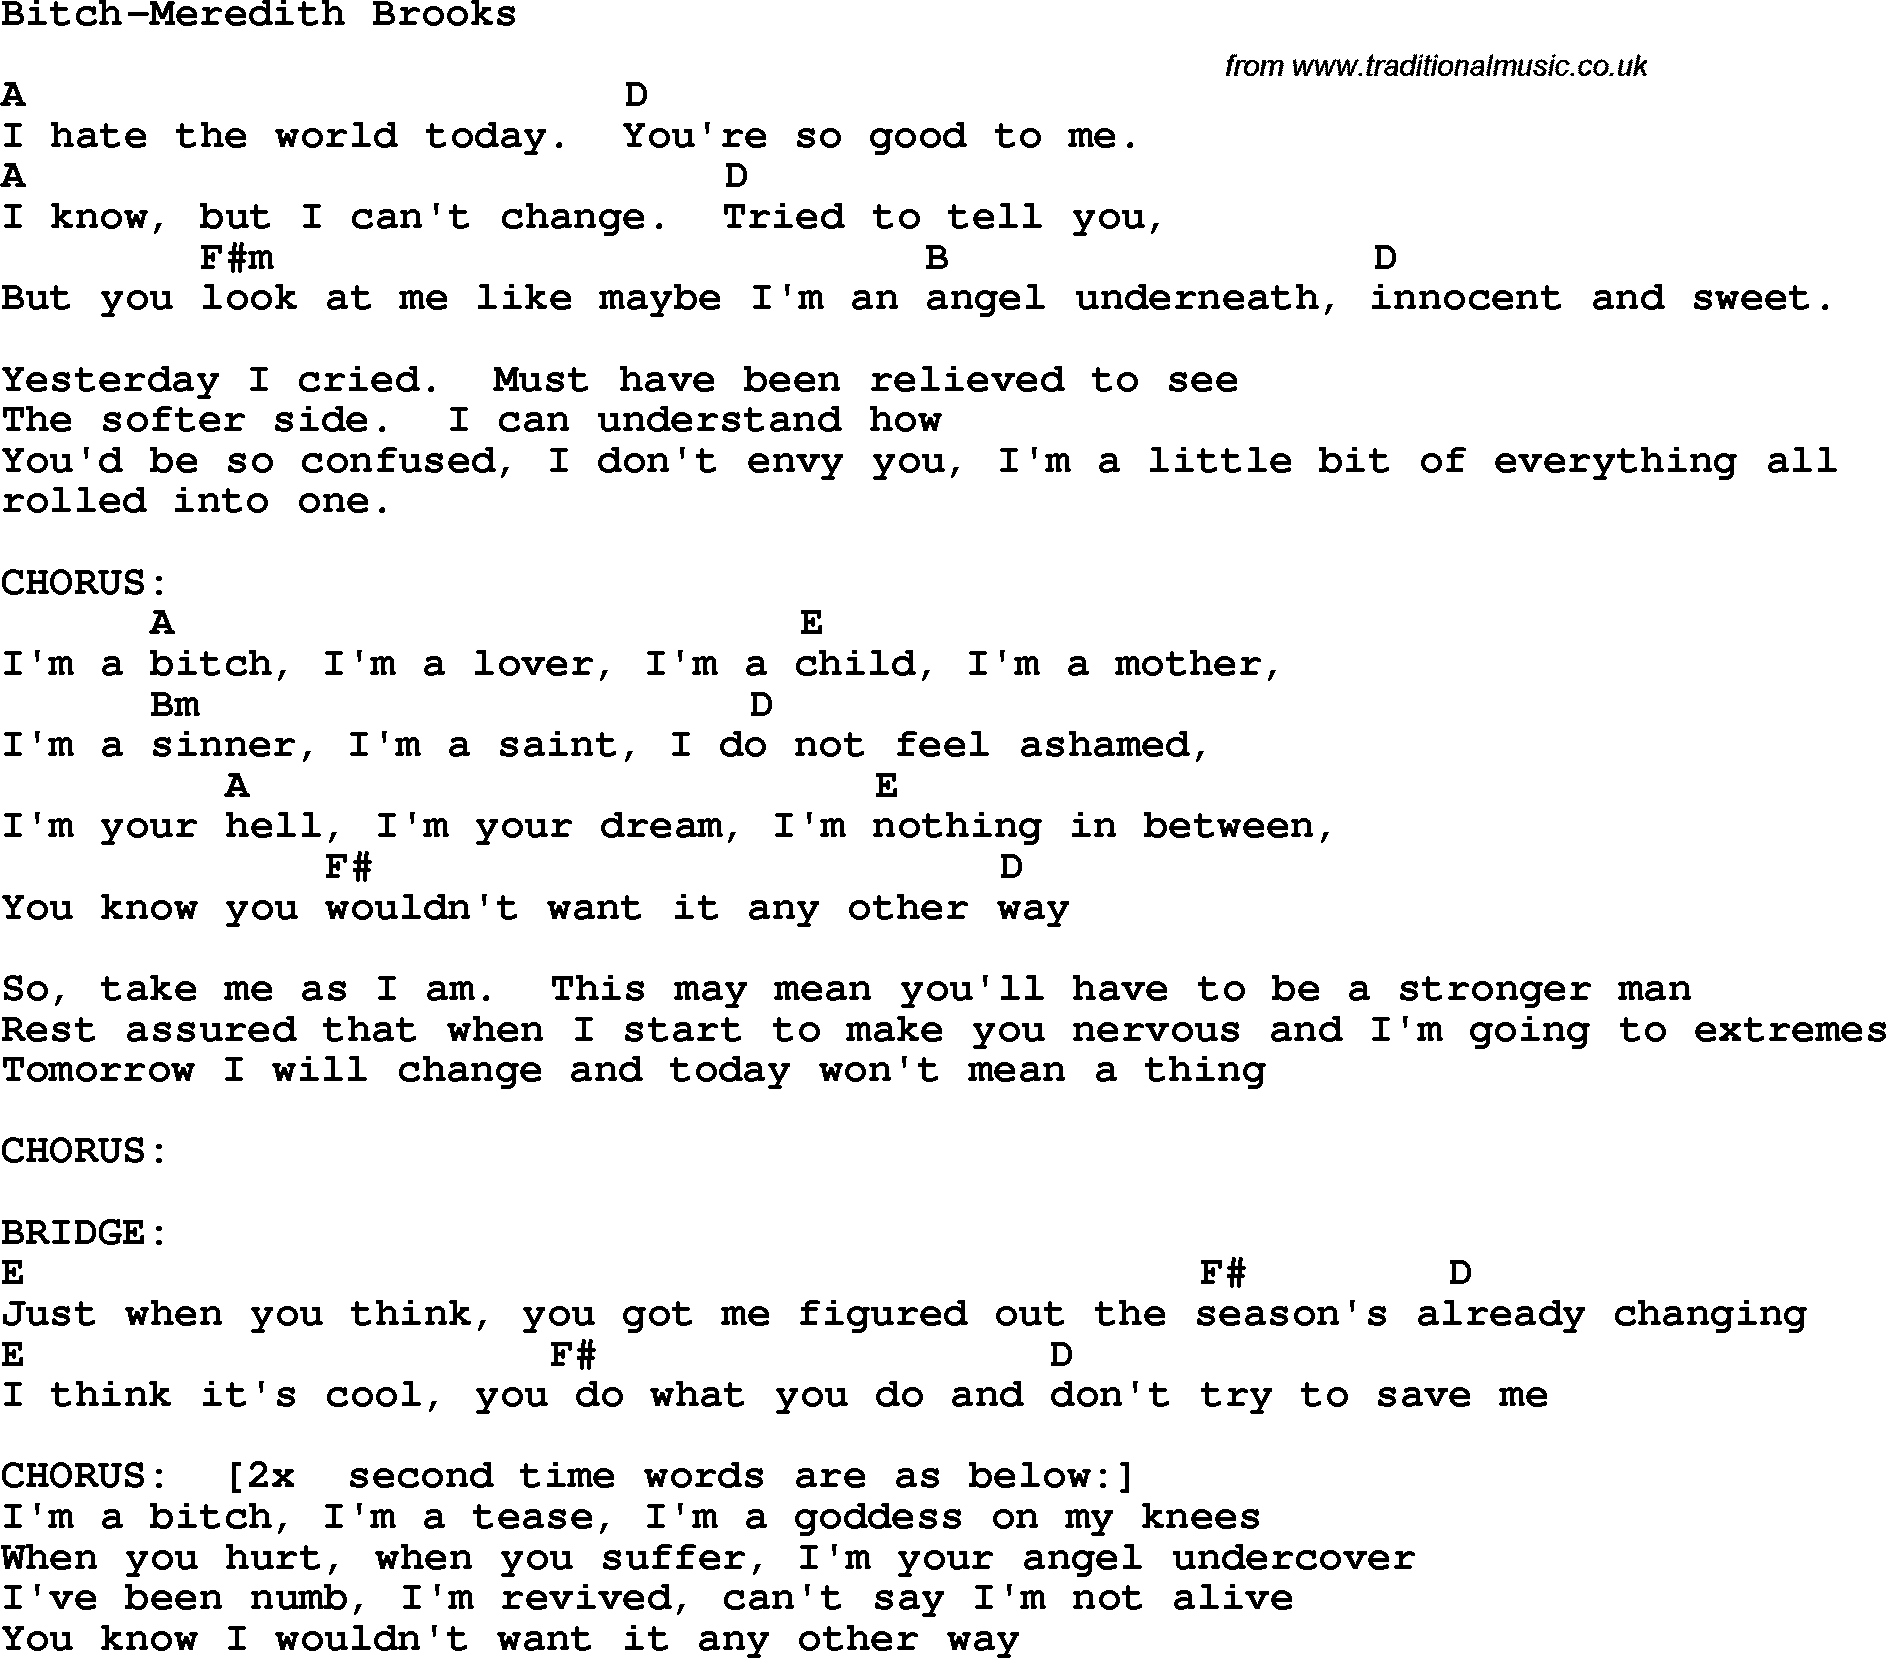 Protest Song Bitch-Meredith Brooks lyrics and chords